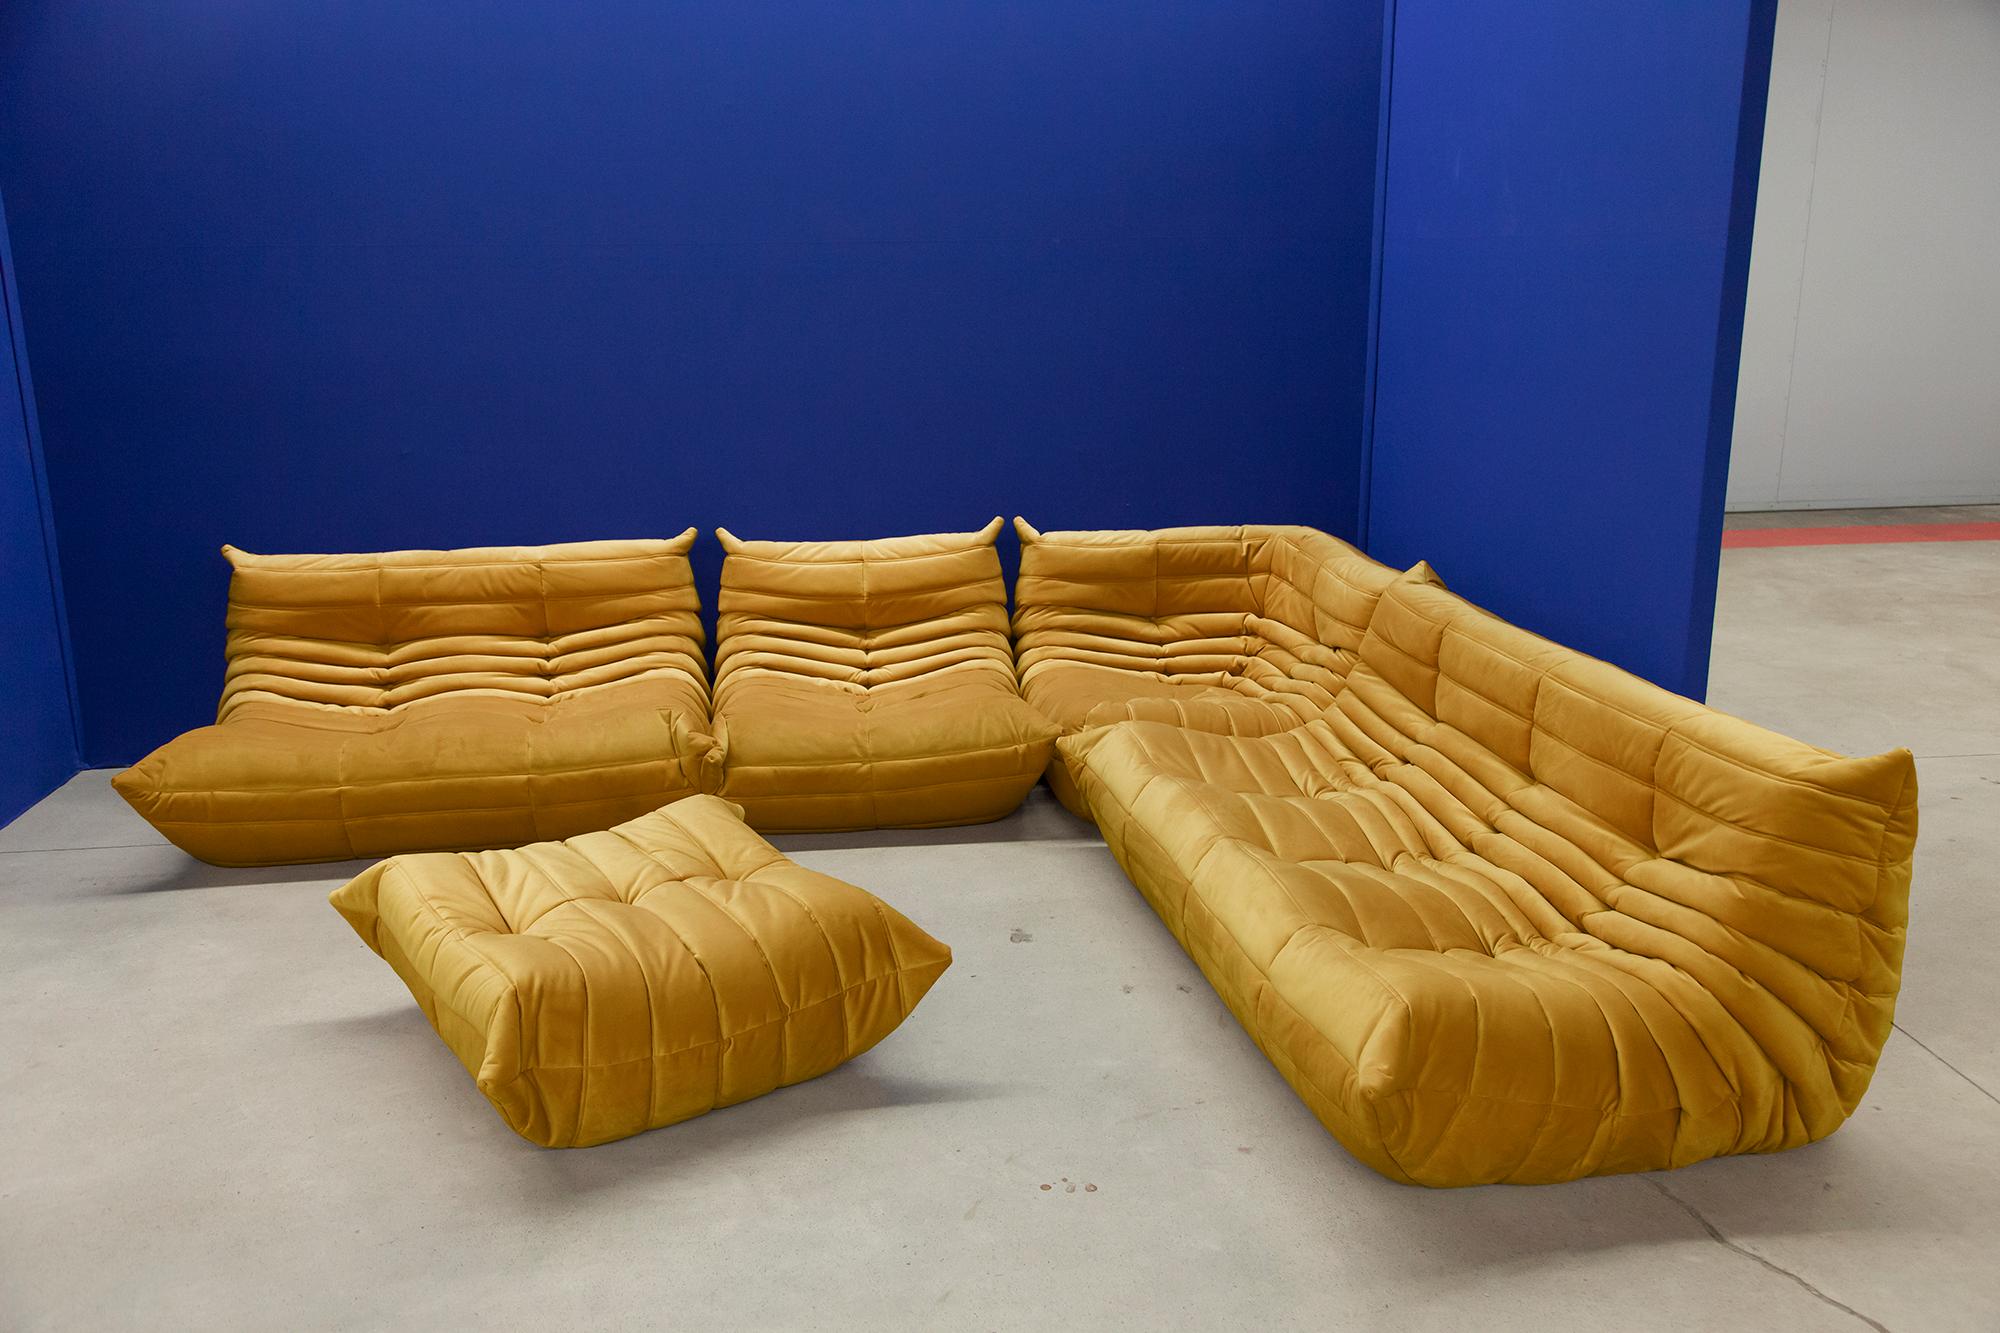 This Togo living room set was designed by Michel Ducaroy in 1973 and was manufactured by Ligne Roset in France. Each piece has the original Ligne Roset logo and genuine bottom. It has been reupholstered in genuine high quality golden/yellow velvet